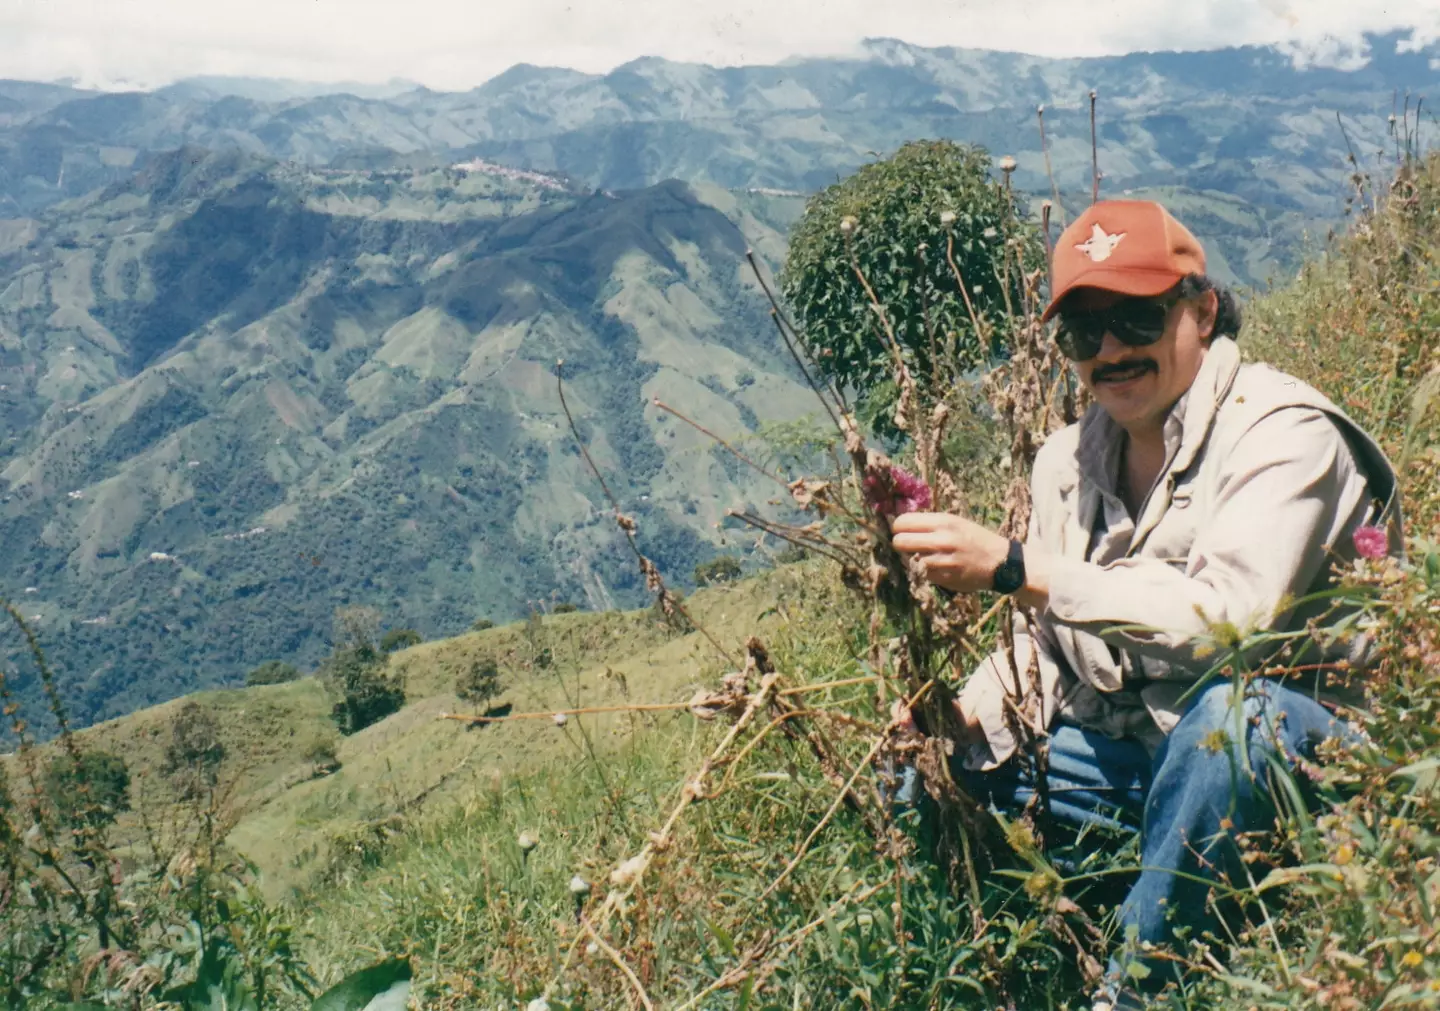 Pena in the Colombian mountains during his time in Colombia.